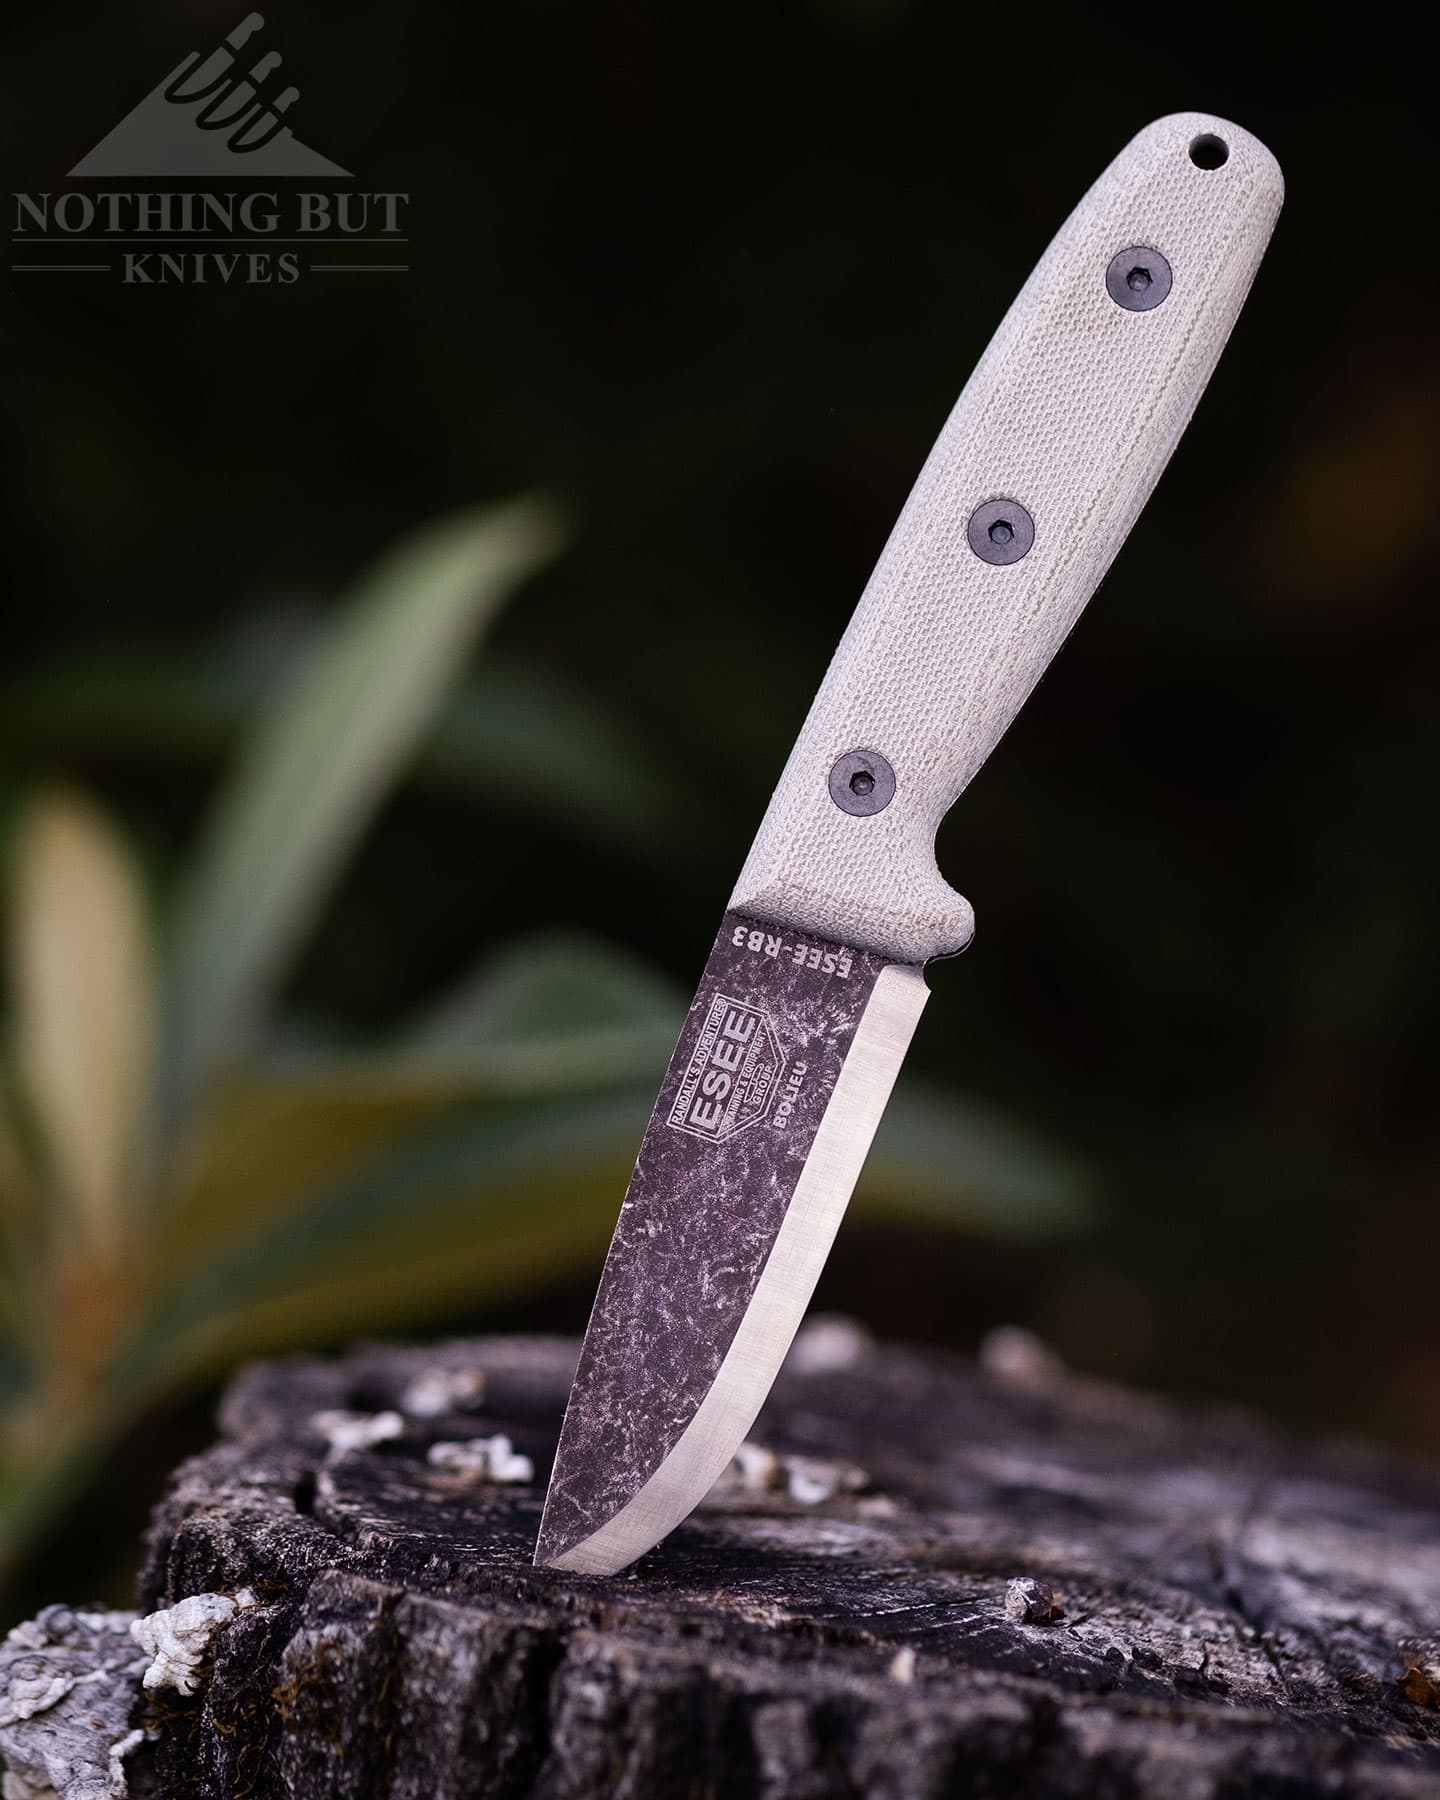 The Esee Camp-Lore RB3 is one of our top picks for a compact bushcraft knife.